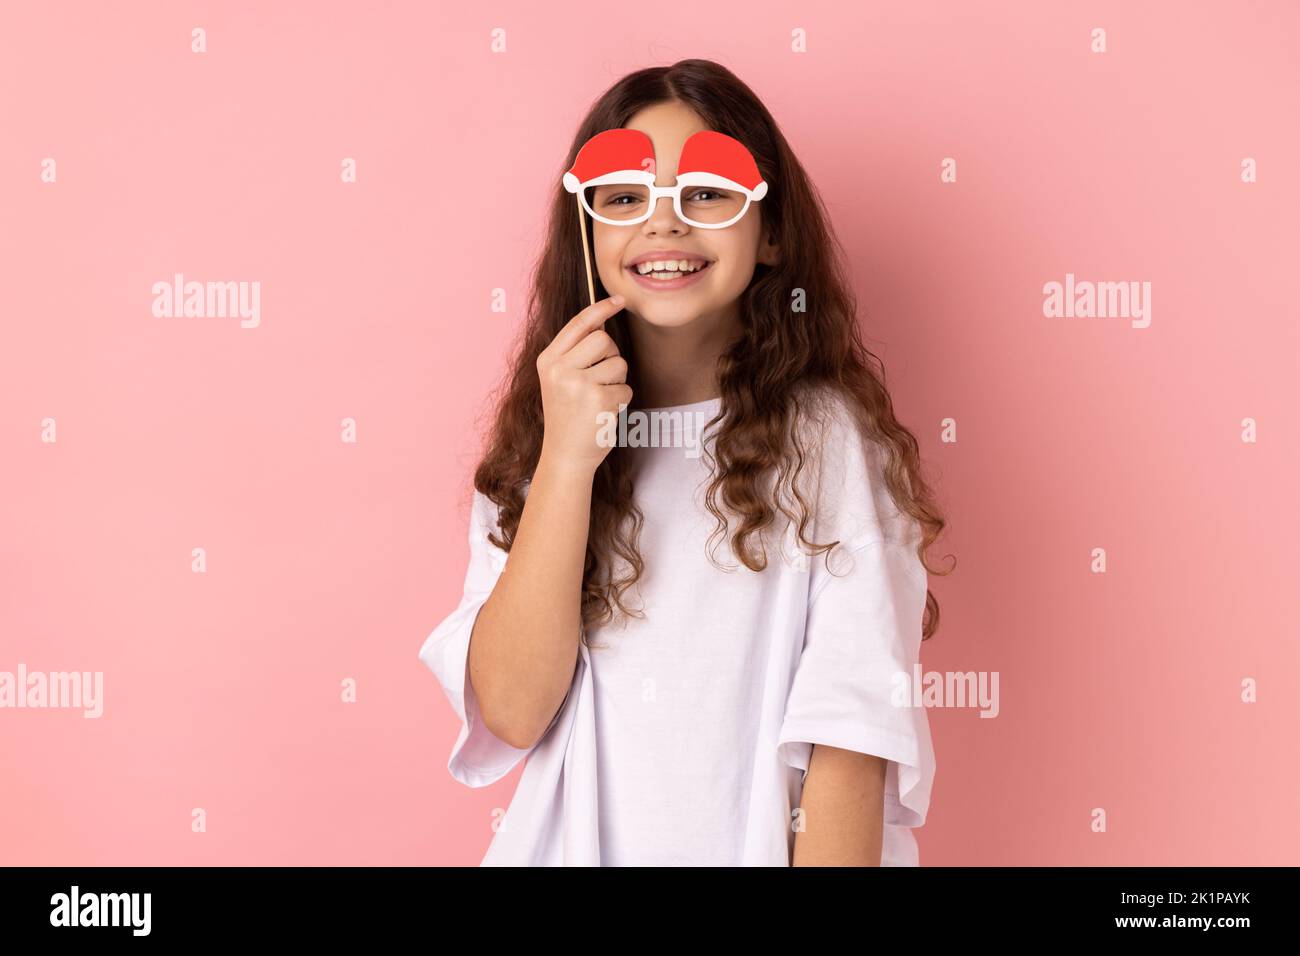 Portrait of little girl wearing white T-shirt holding funny paper glasses, having fun playing game, wearing masquerade accessory. Indoor studio shot isolated on pink background. Stock Photo